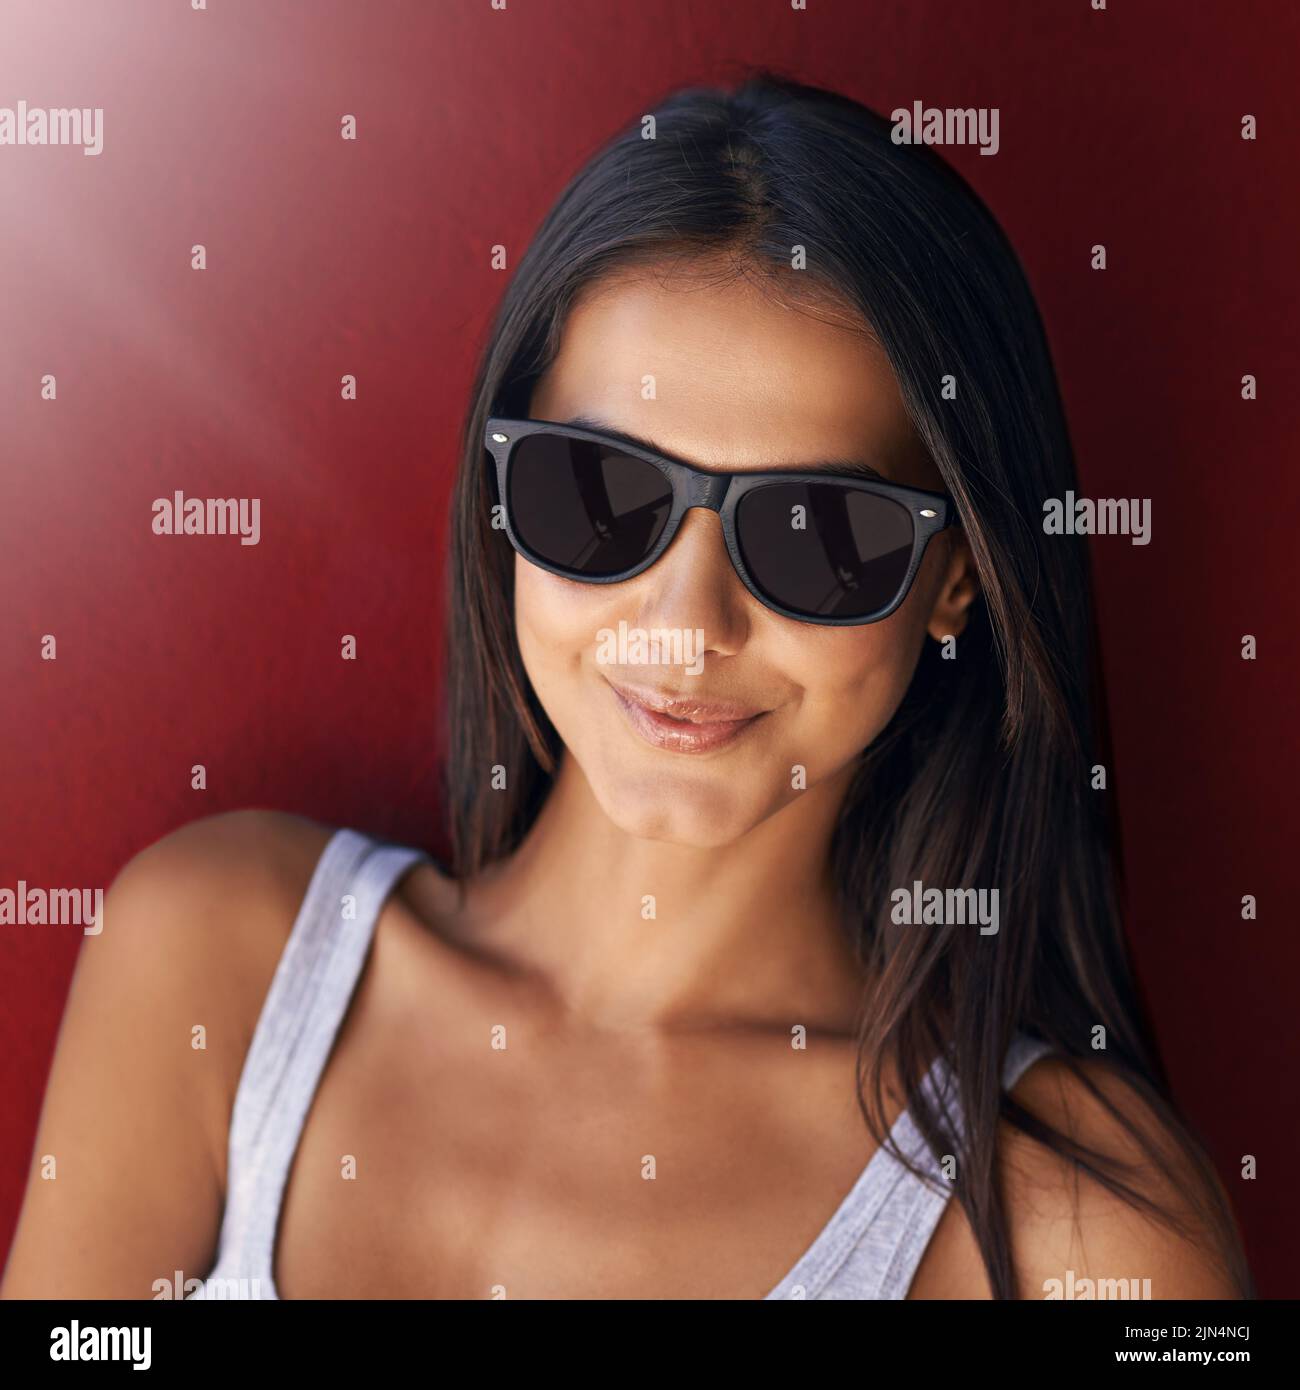 Cool, confident and beautiful woman wearing sunglasses and smiling against a red wall with lens flare. Face of a cheerful, stunning and happy female Stock Photo